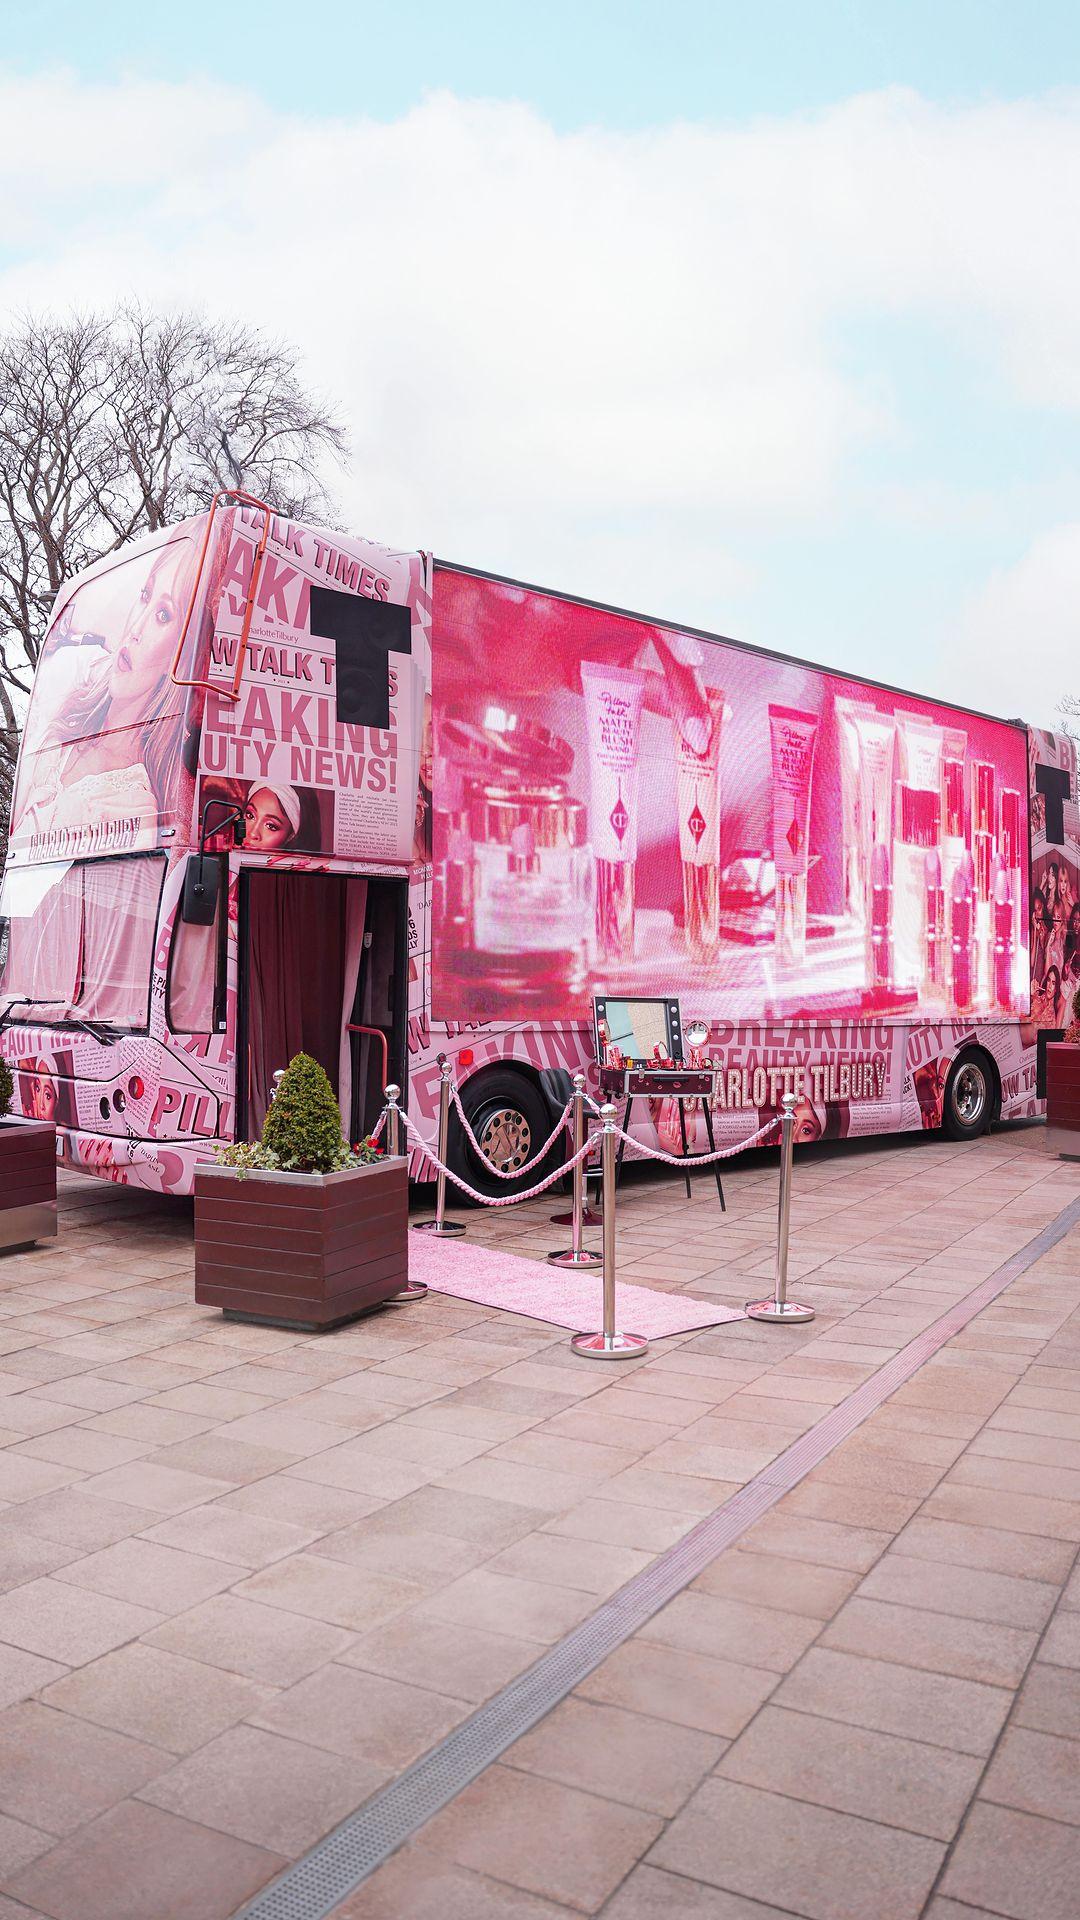 class="content__text"
 Step inside the @charlottetilbury Pillow Talk Party Bus at Brown Thomas Dundrum.

Book your appointment now through the link in bio to experience the world of Pillow Talk, avail of complimentary make-up touch ups, learn application tips and tricks from The Charlotte Tilbury team and explore the decked out bus including the new Pillow Talk Beauty Blush Wands and so much more.

Bookings available on 24th – 26th February and 3rd – 5th March.

 #BrownThomas
 #BrownThomasDundrum
 #CharlotteTilbury 
 